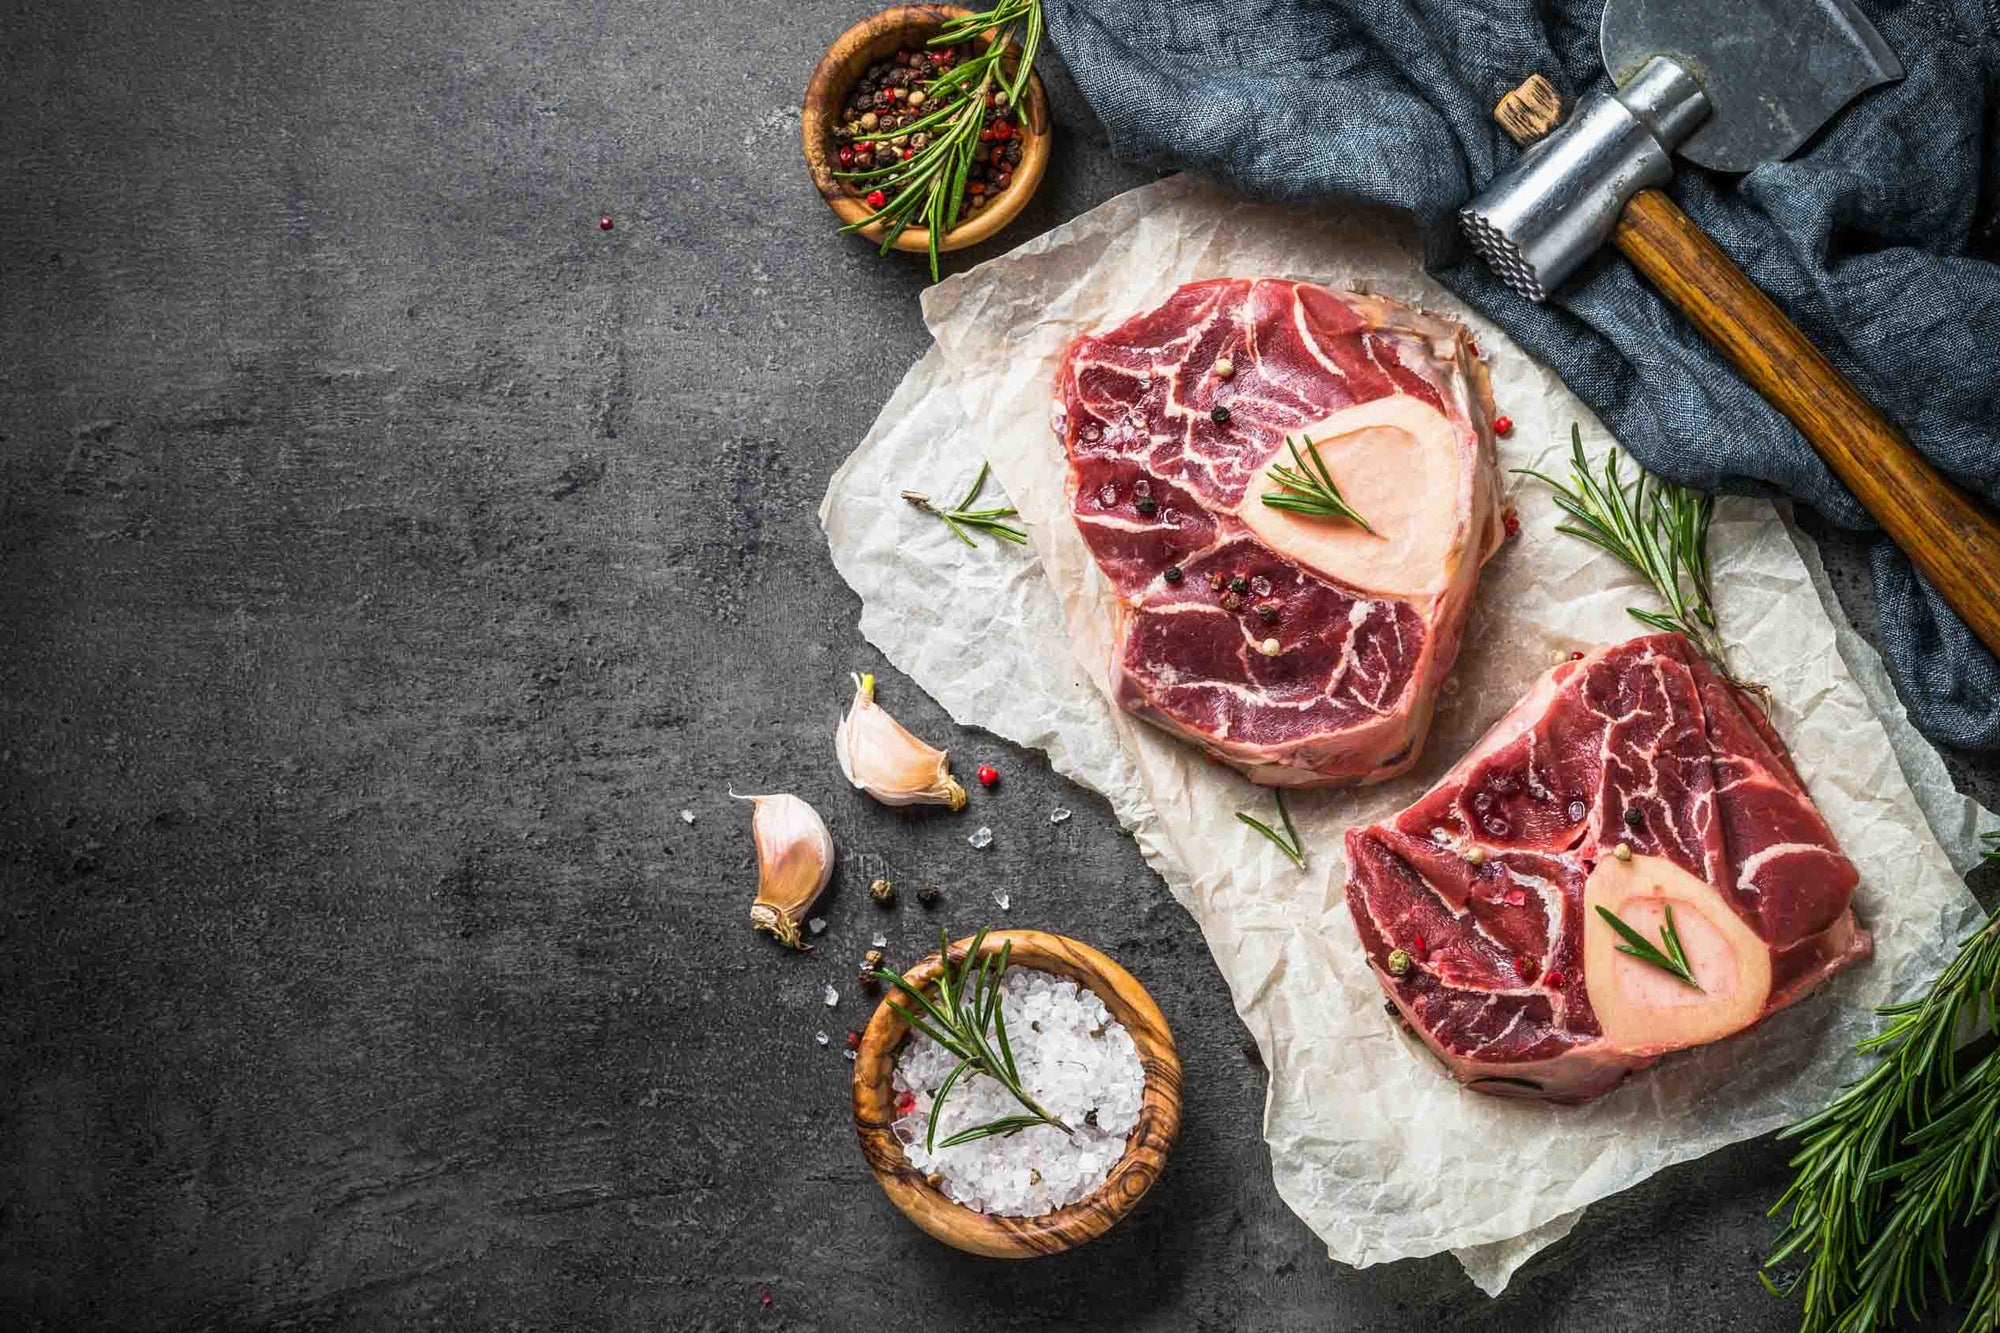 fresh bison cut cuts delivery 100% grass fed and finished as nature intended amazon prime never frozen grind fast order buffalo next day shipping non-gmo soy free corn-free gluten-free boneless freshest bison short ribs back osso bucco 